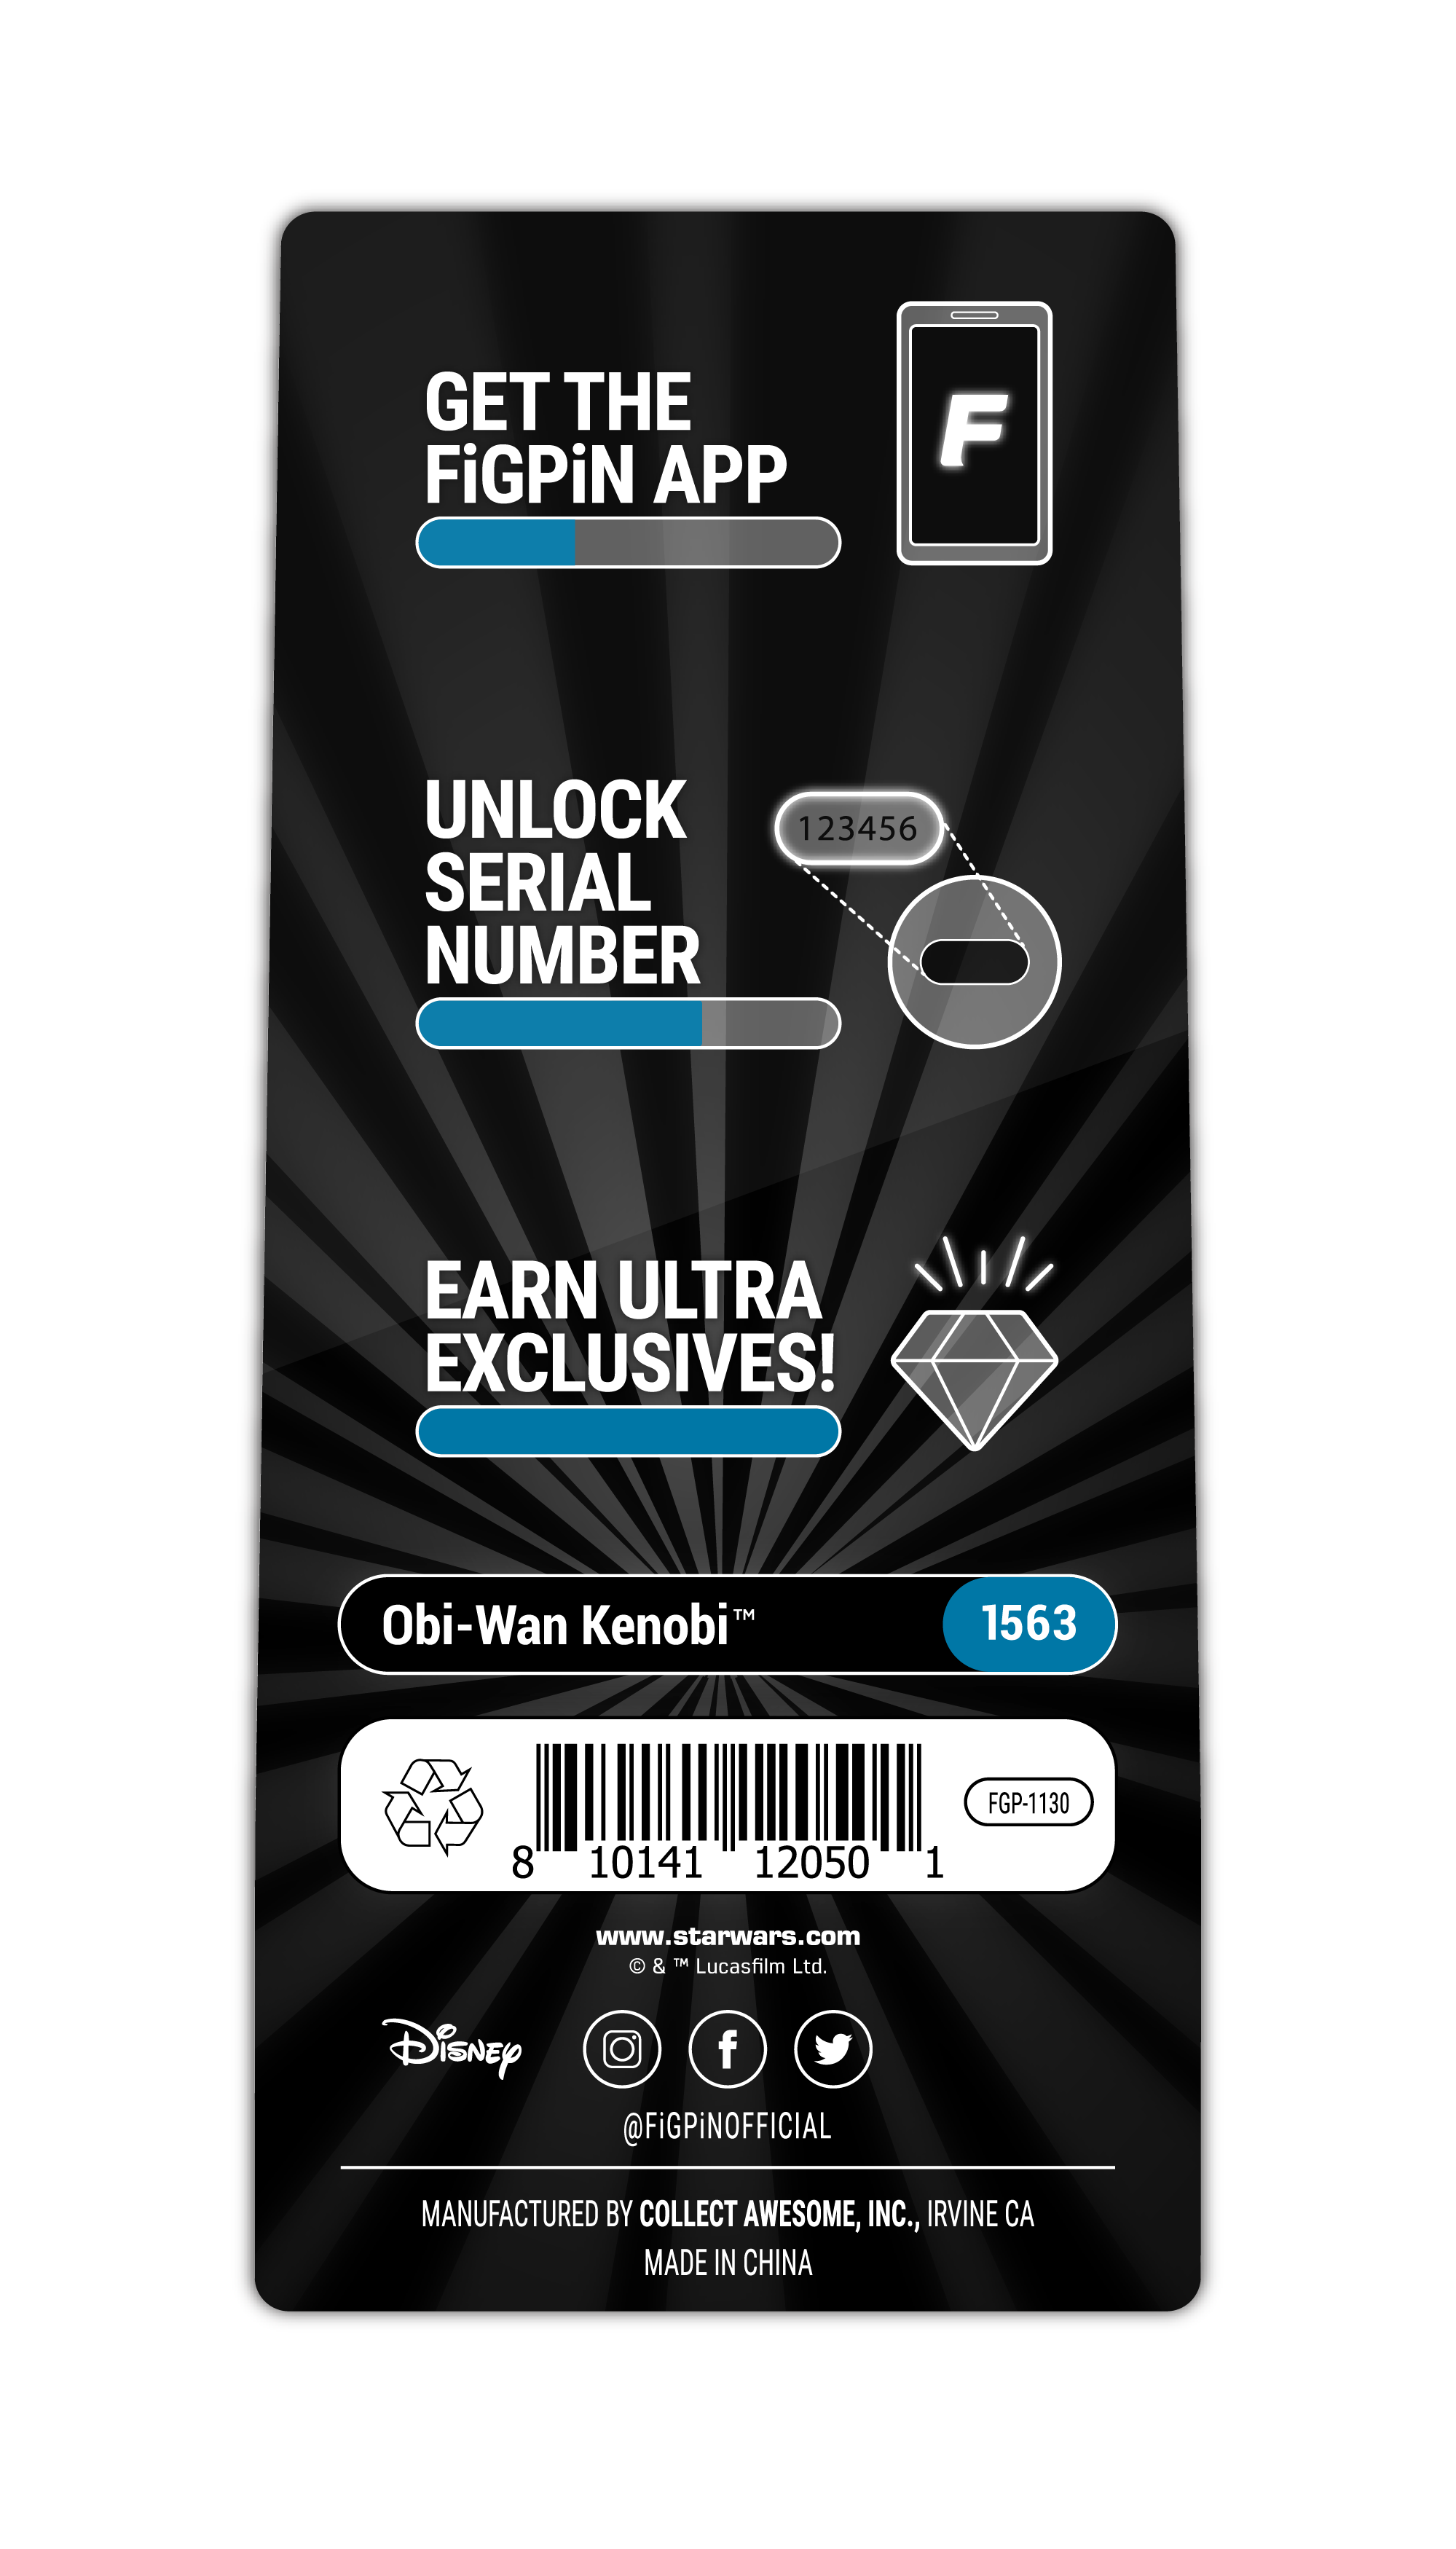 Character card with information on the FiGPiN APP and text "Obi-Wan Kenobi (1563)"